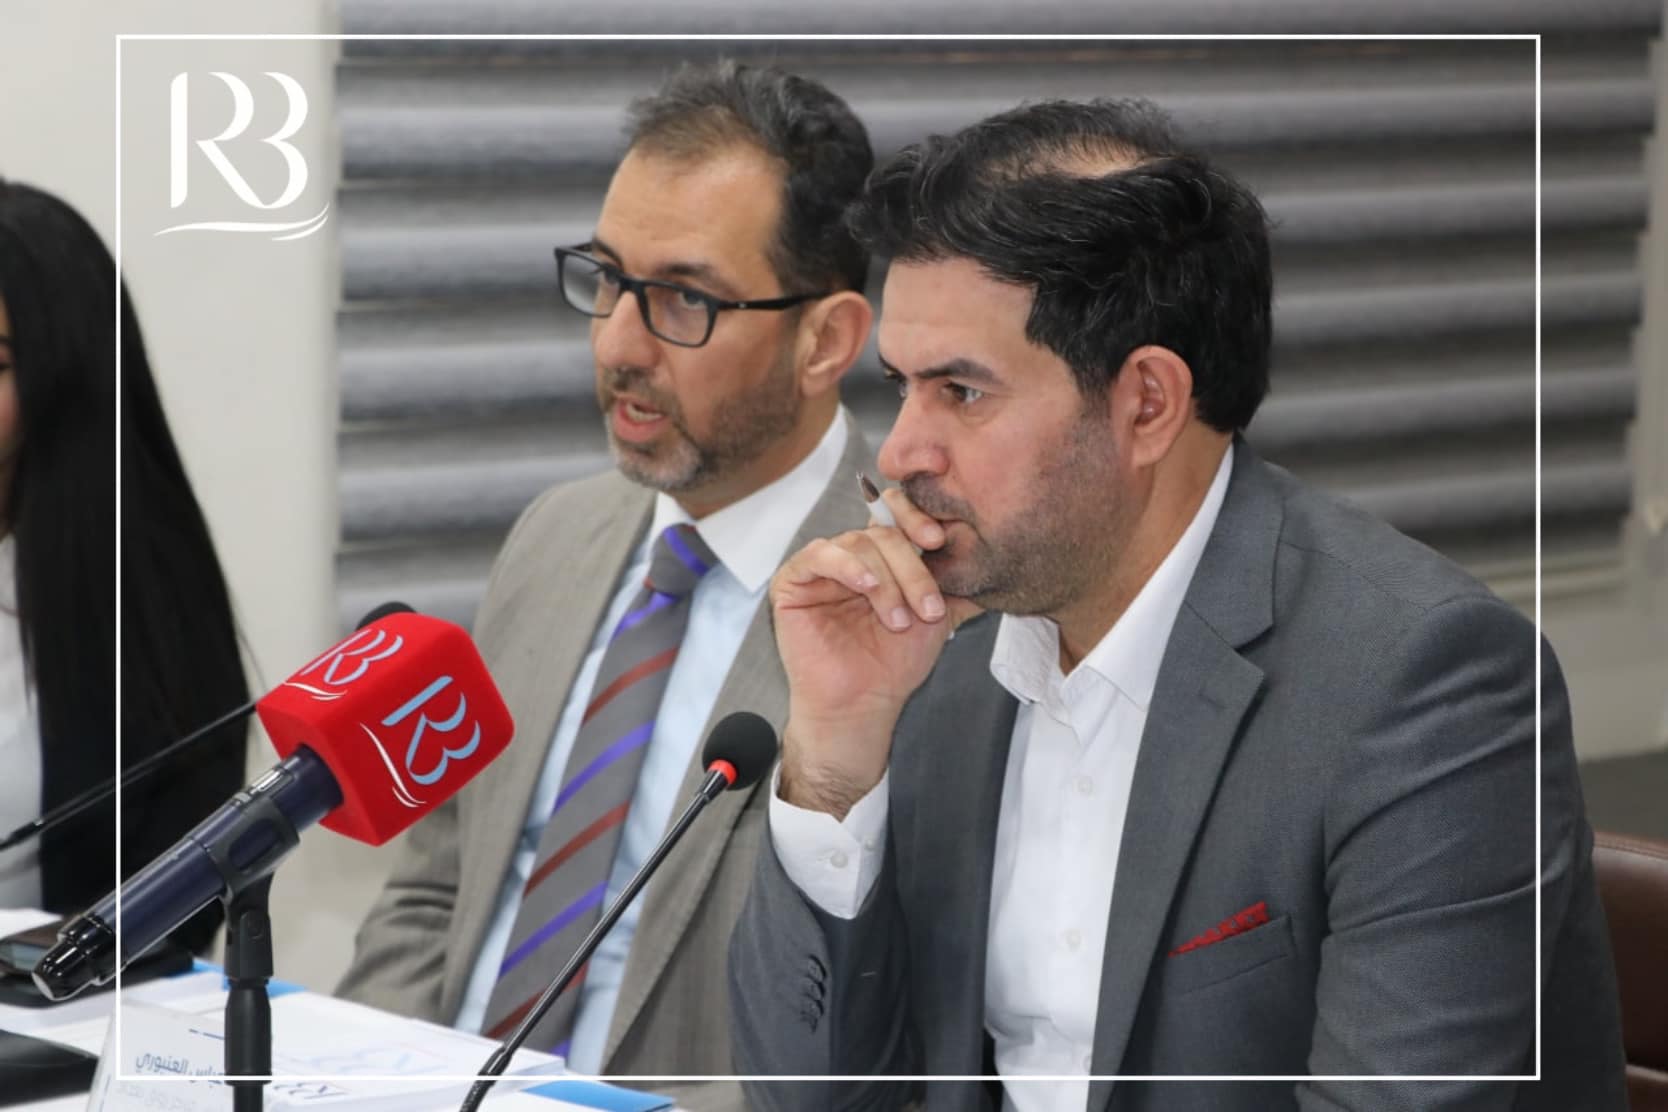 the dialogue workshop entitled "Dialogue of the components of Iraqi society on constitutional events"